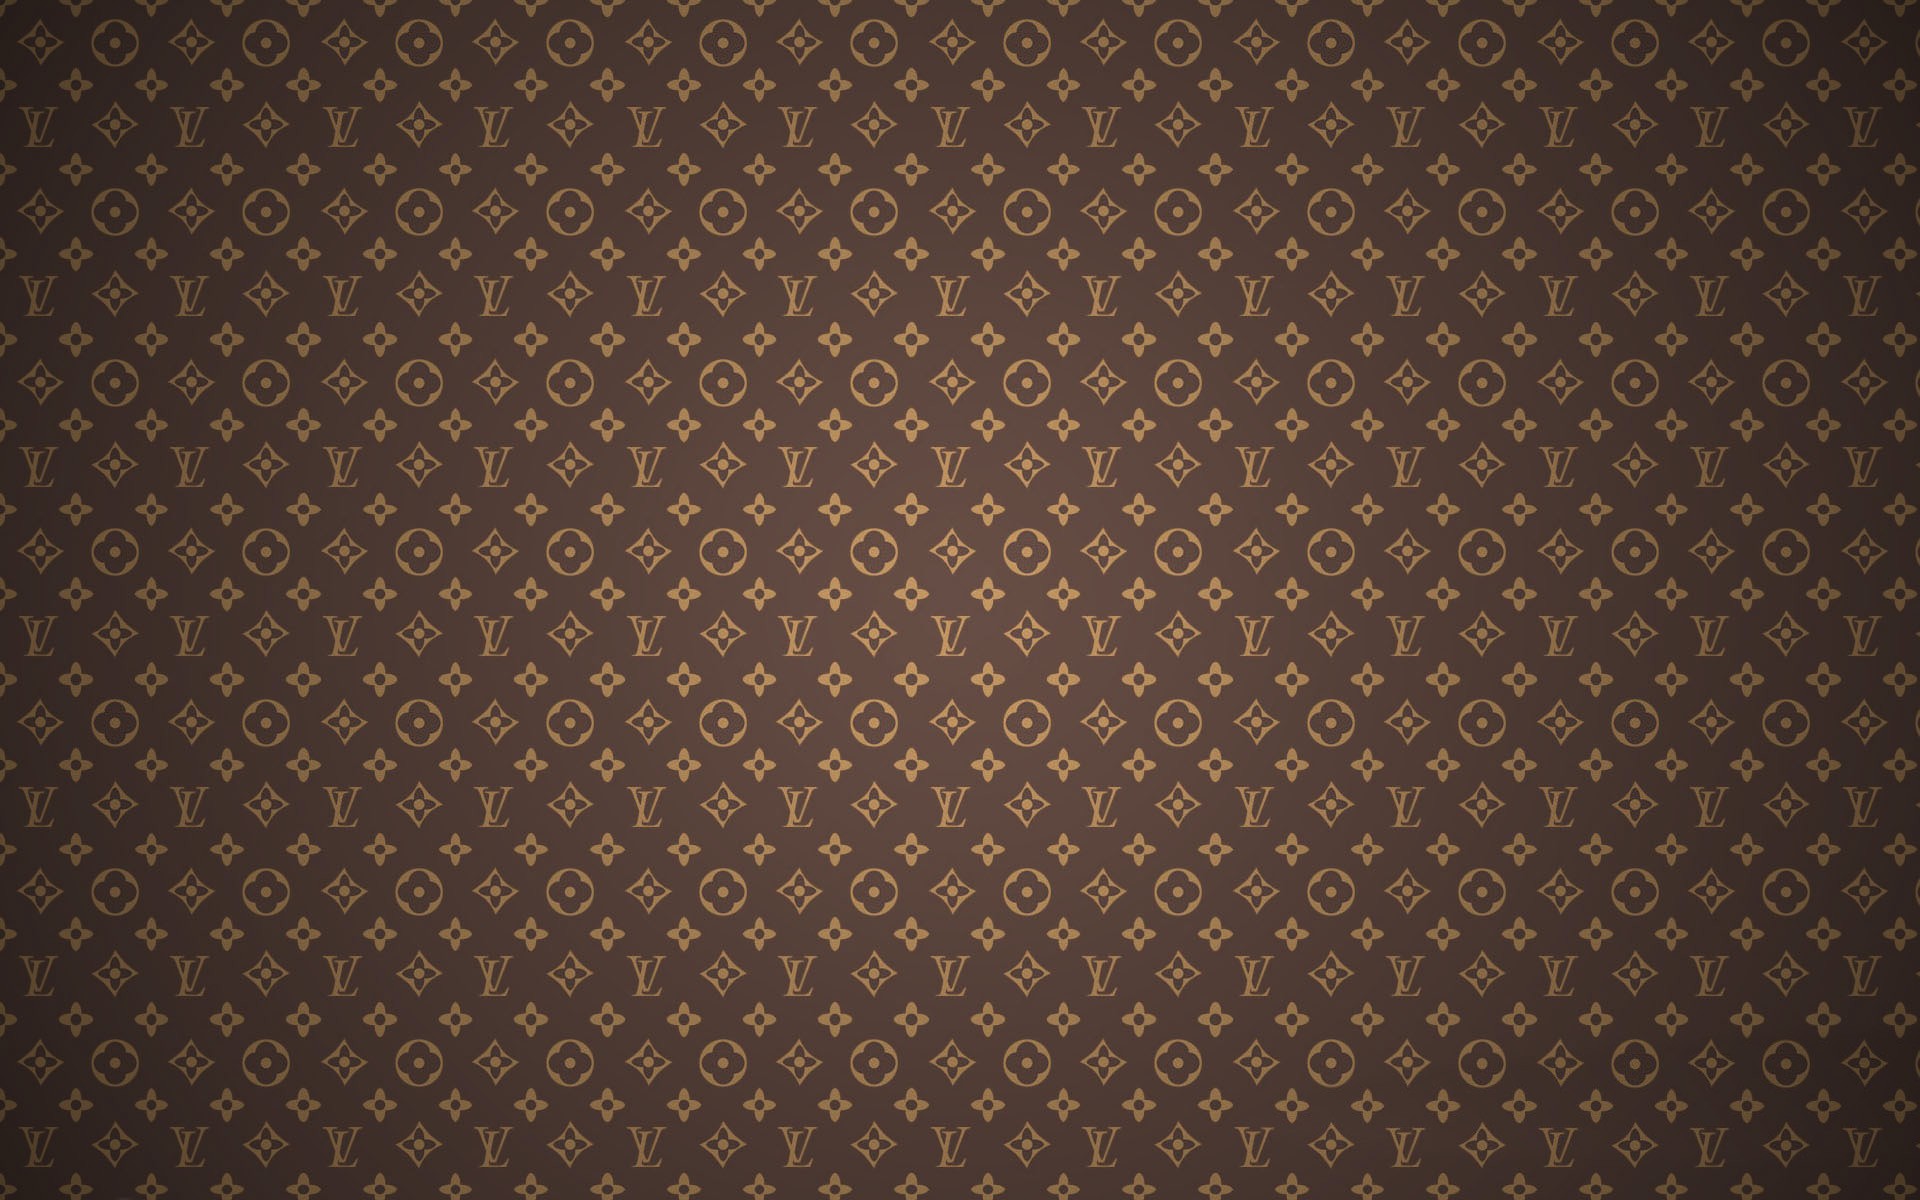 Louis Vuitton iPad Wallpaper Pictures To Pin